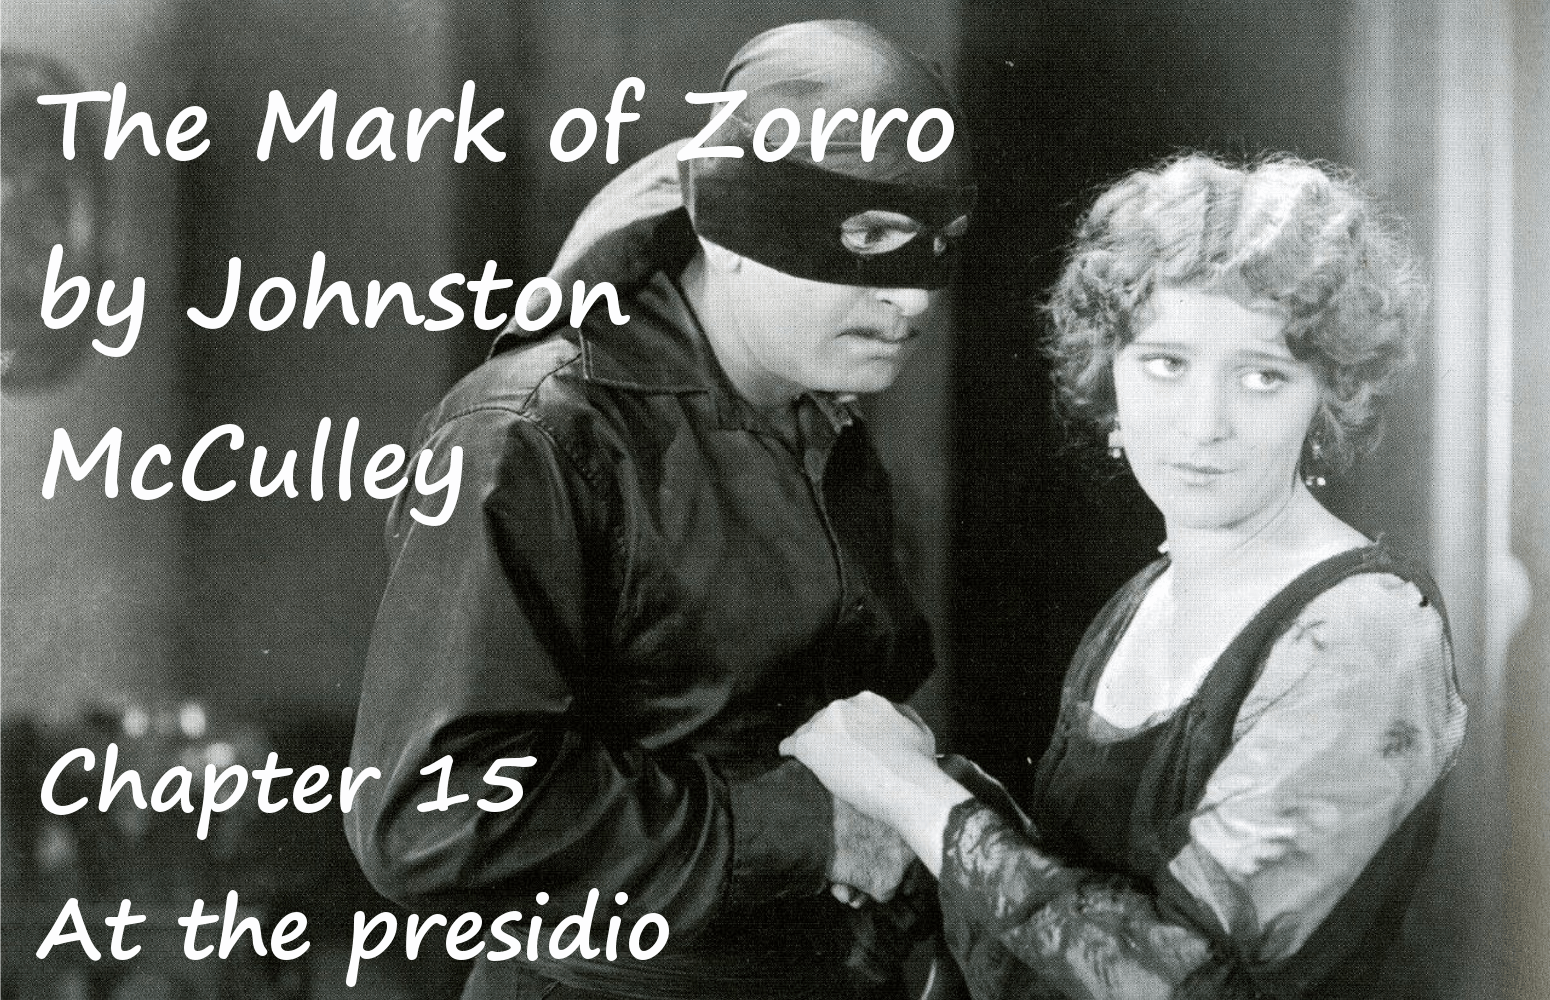 The Mark of Zorro chapter 15 At the presidio by Johnston McCulley